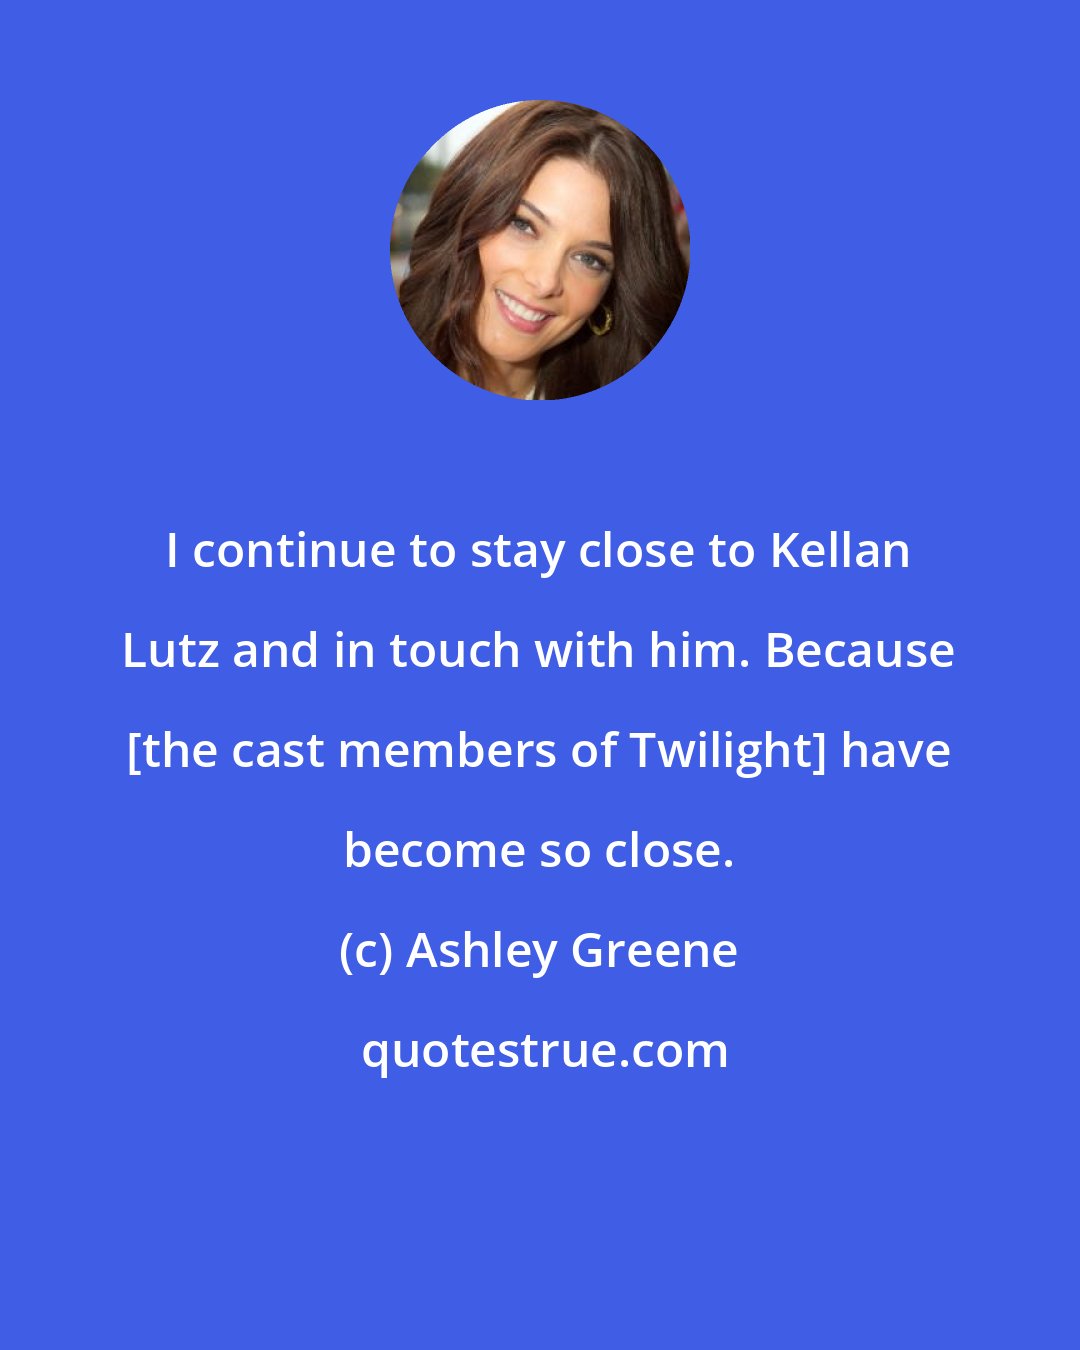 Ashley Greene: I continue to stay close to Kellan Lutz and in touch with him. Because [the cast members of Twilight] have become so close.